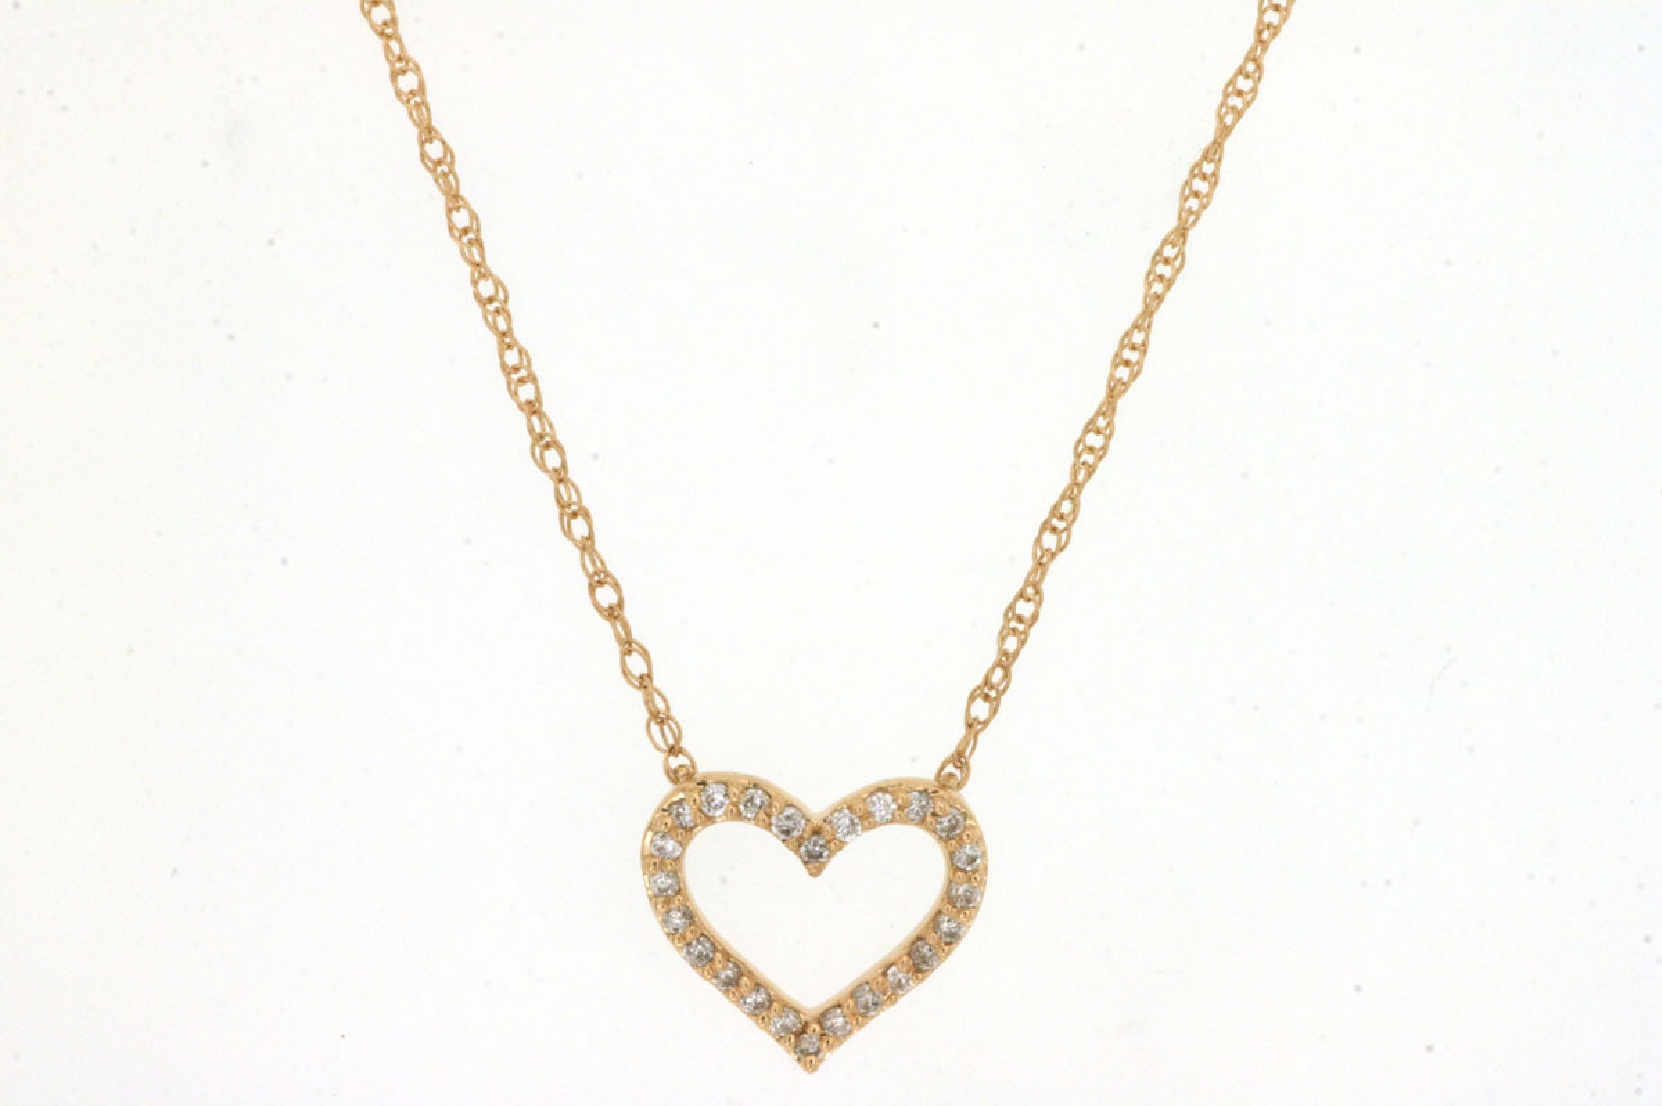 14K Yellow Gold Diamond Heart Necklace
0.07ct

18 Inches